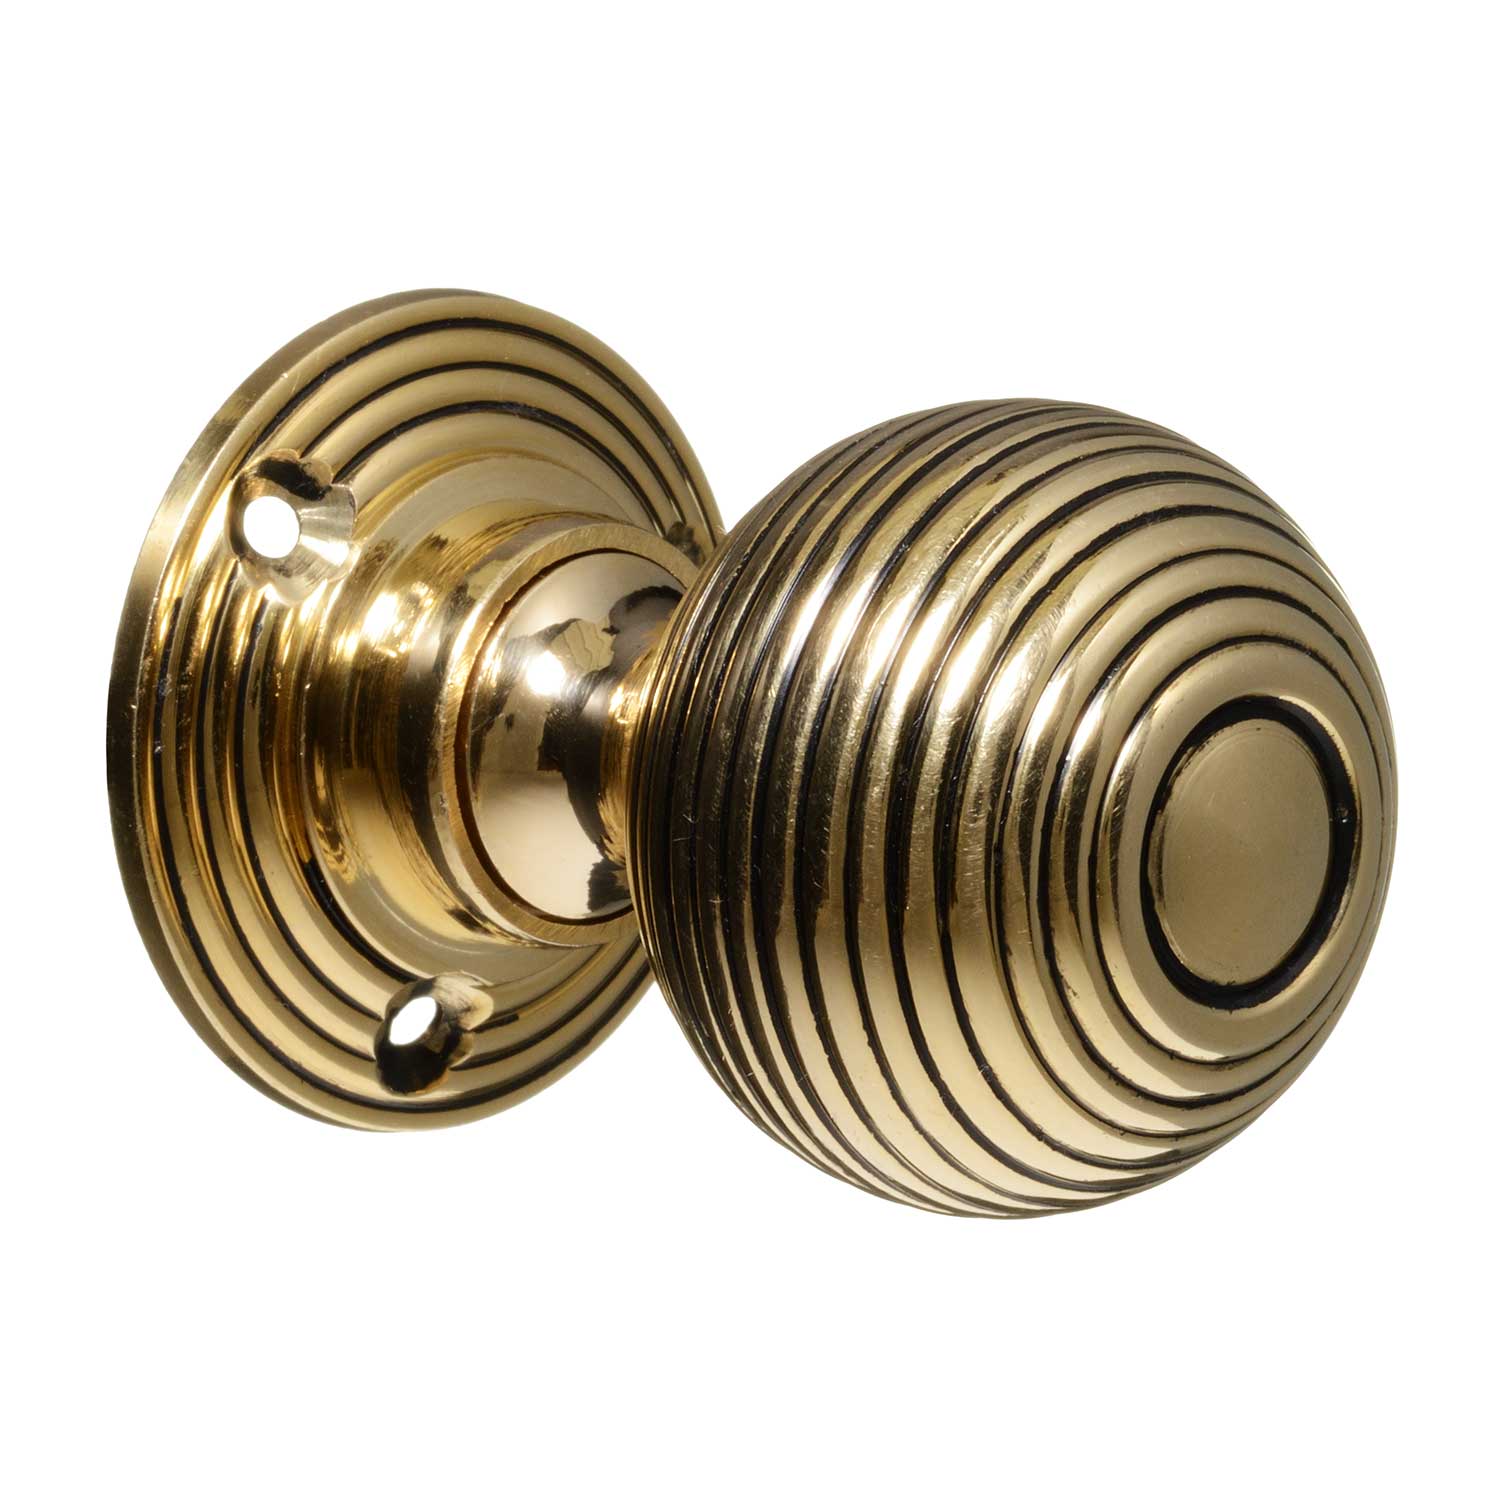 Solid Brass Antique Reeded Beehive Bathroom Thumb Turn & Release